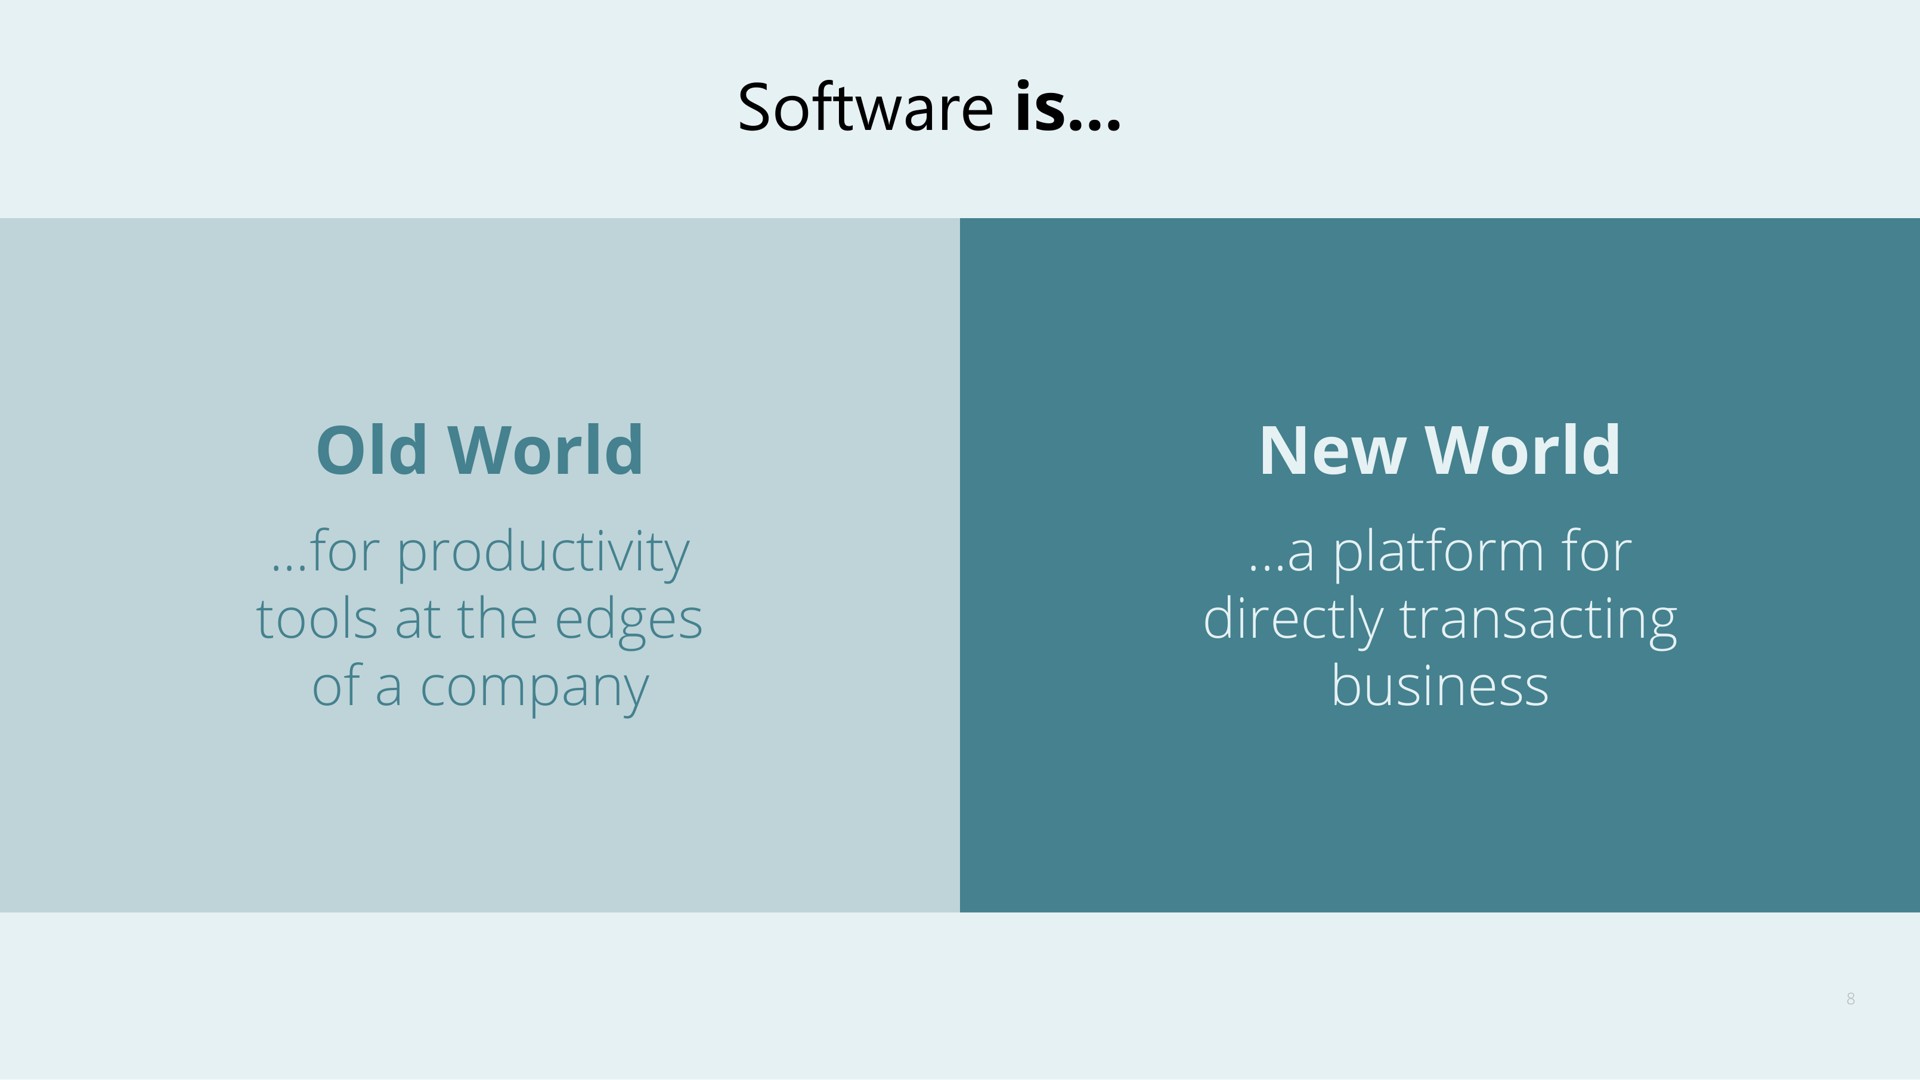 is old world new world for productivity tools at the edges of a company a platform for directly transacting useless | Confluent